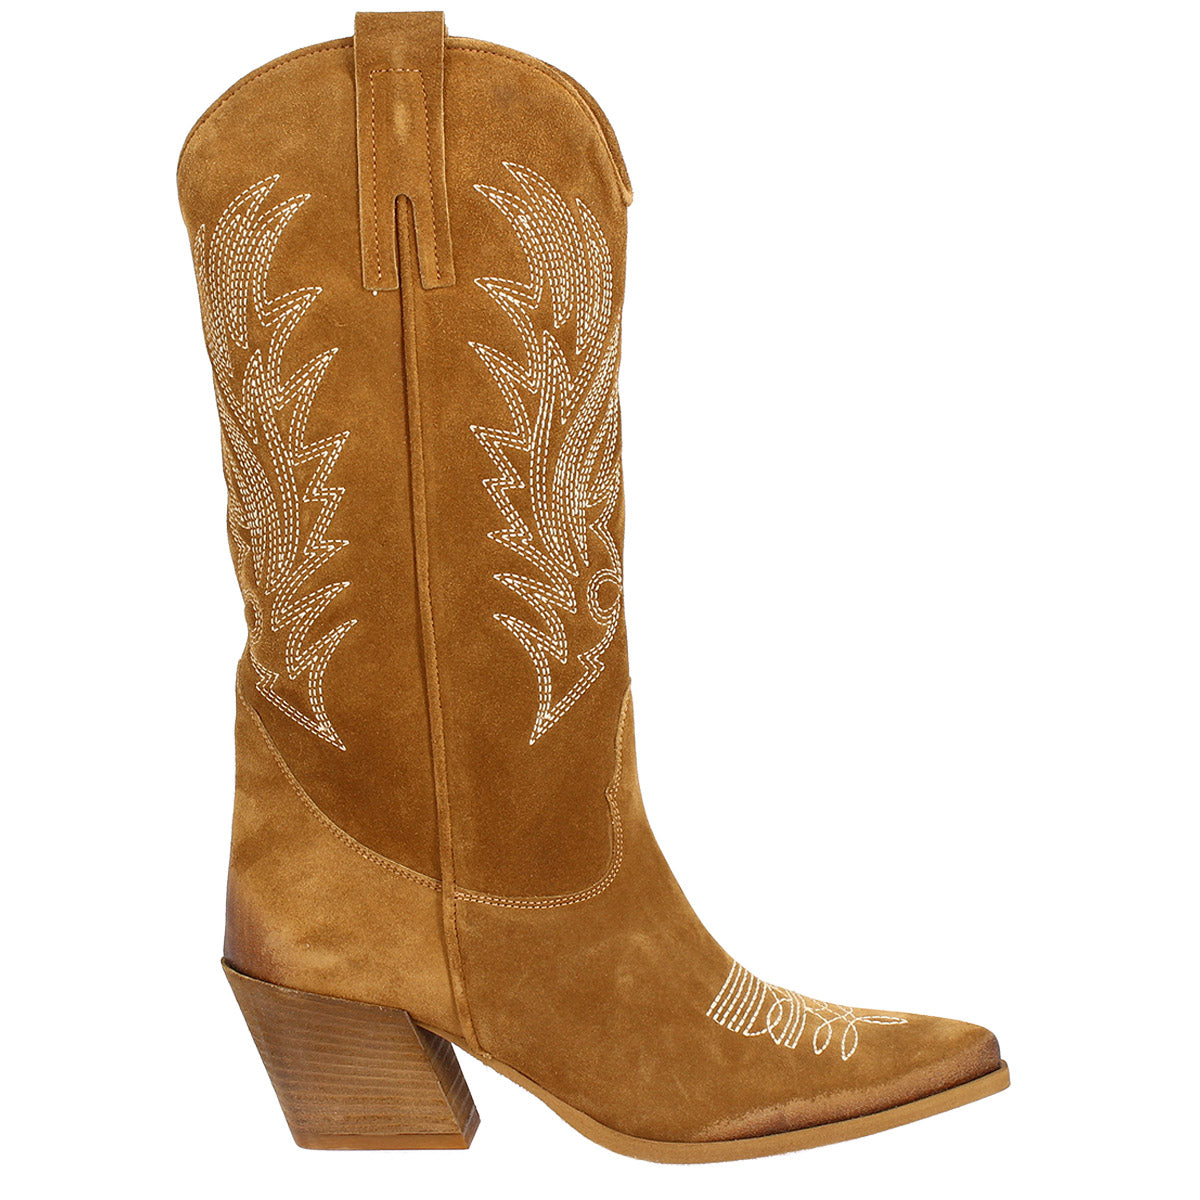 Women's Texan ankle boot in tan-colored suede with embroidery.